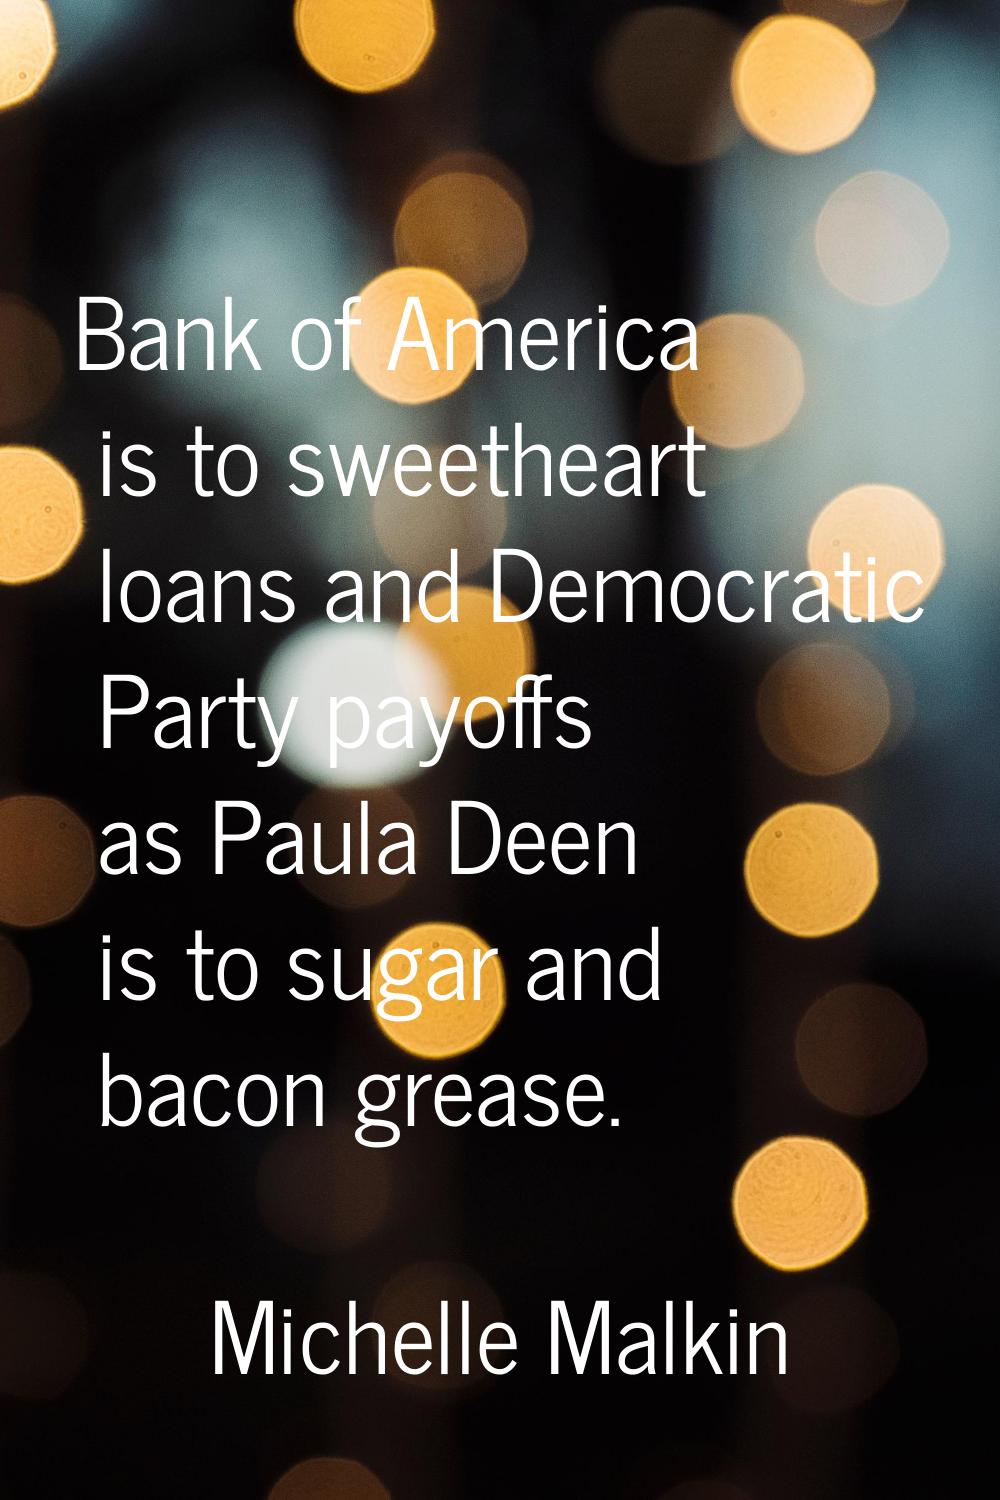 Bank of America is to sweetheart loans and Democratic Party payoffs as Paula Deen is to sugar and b